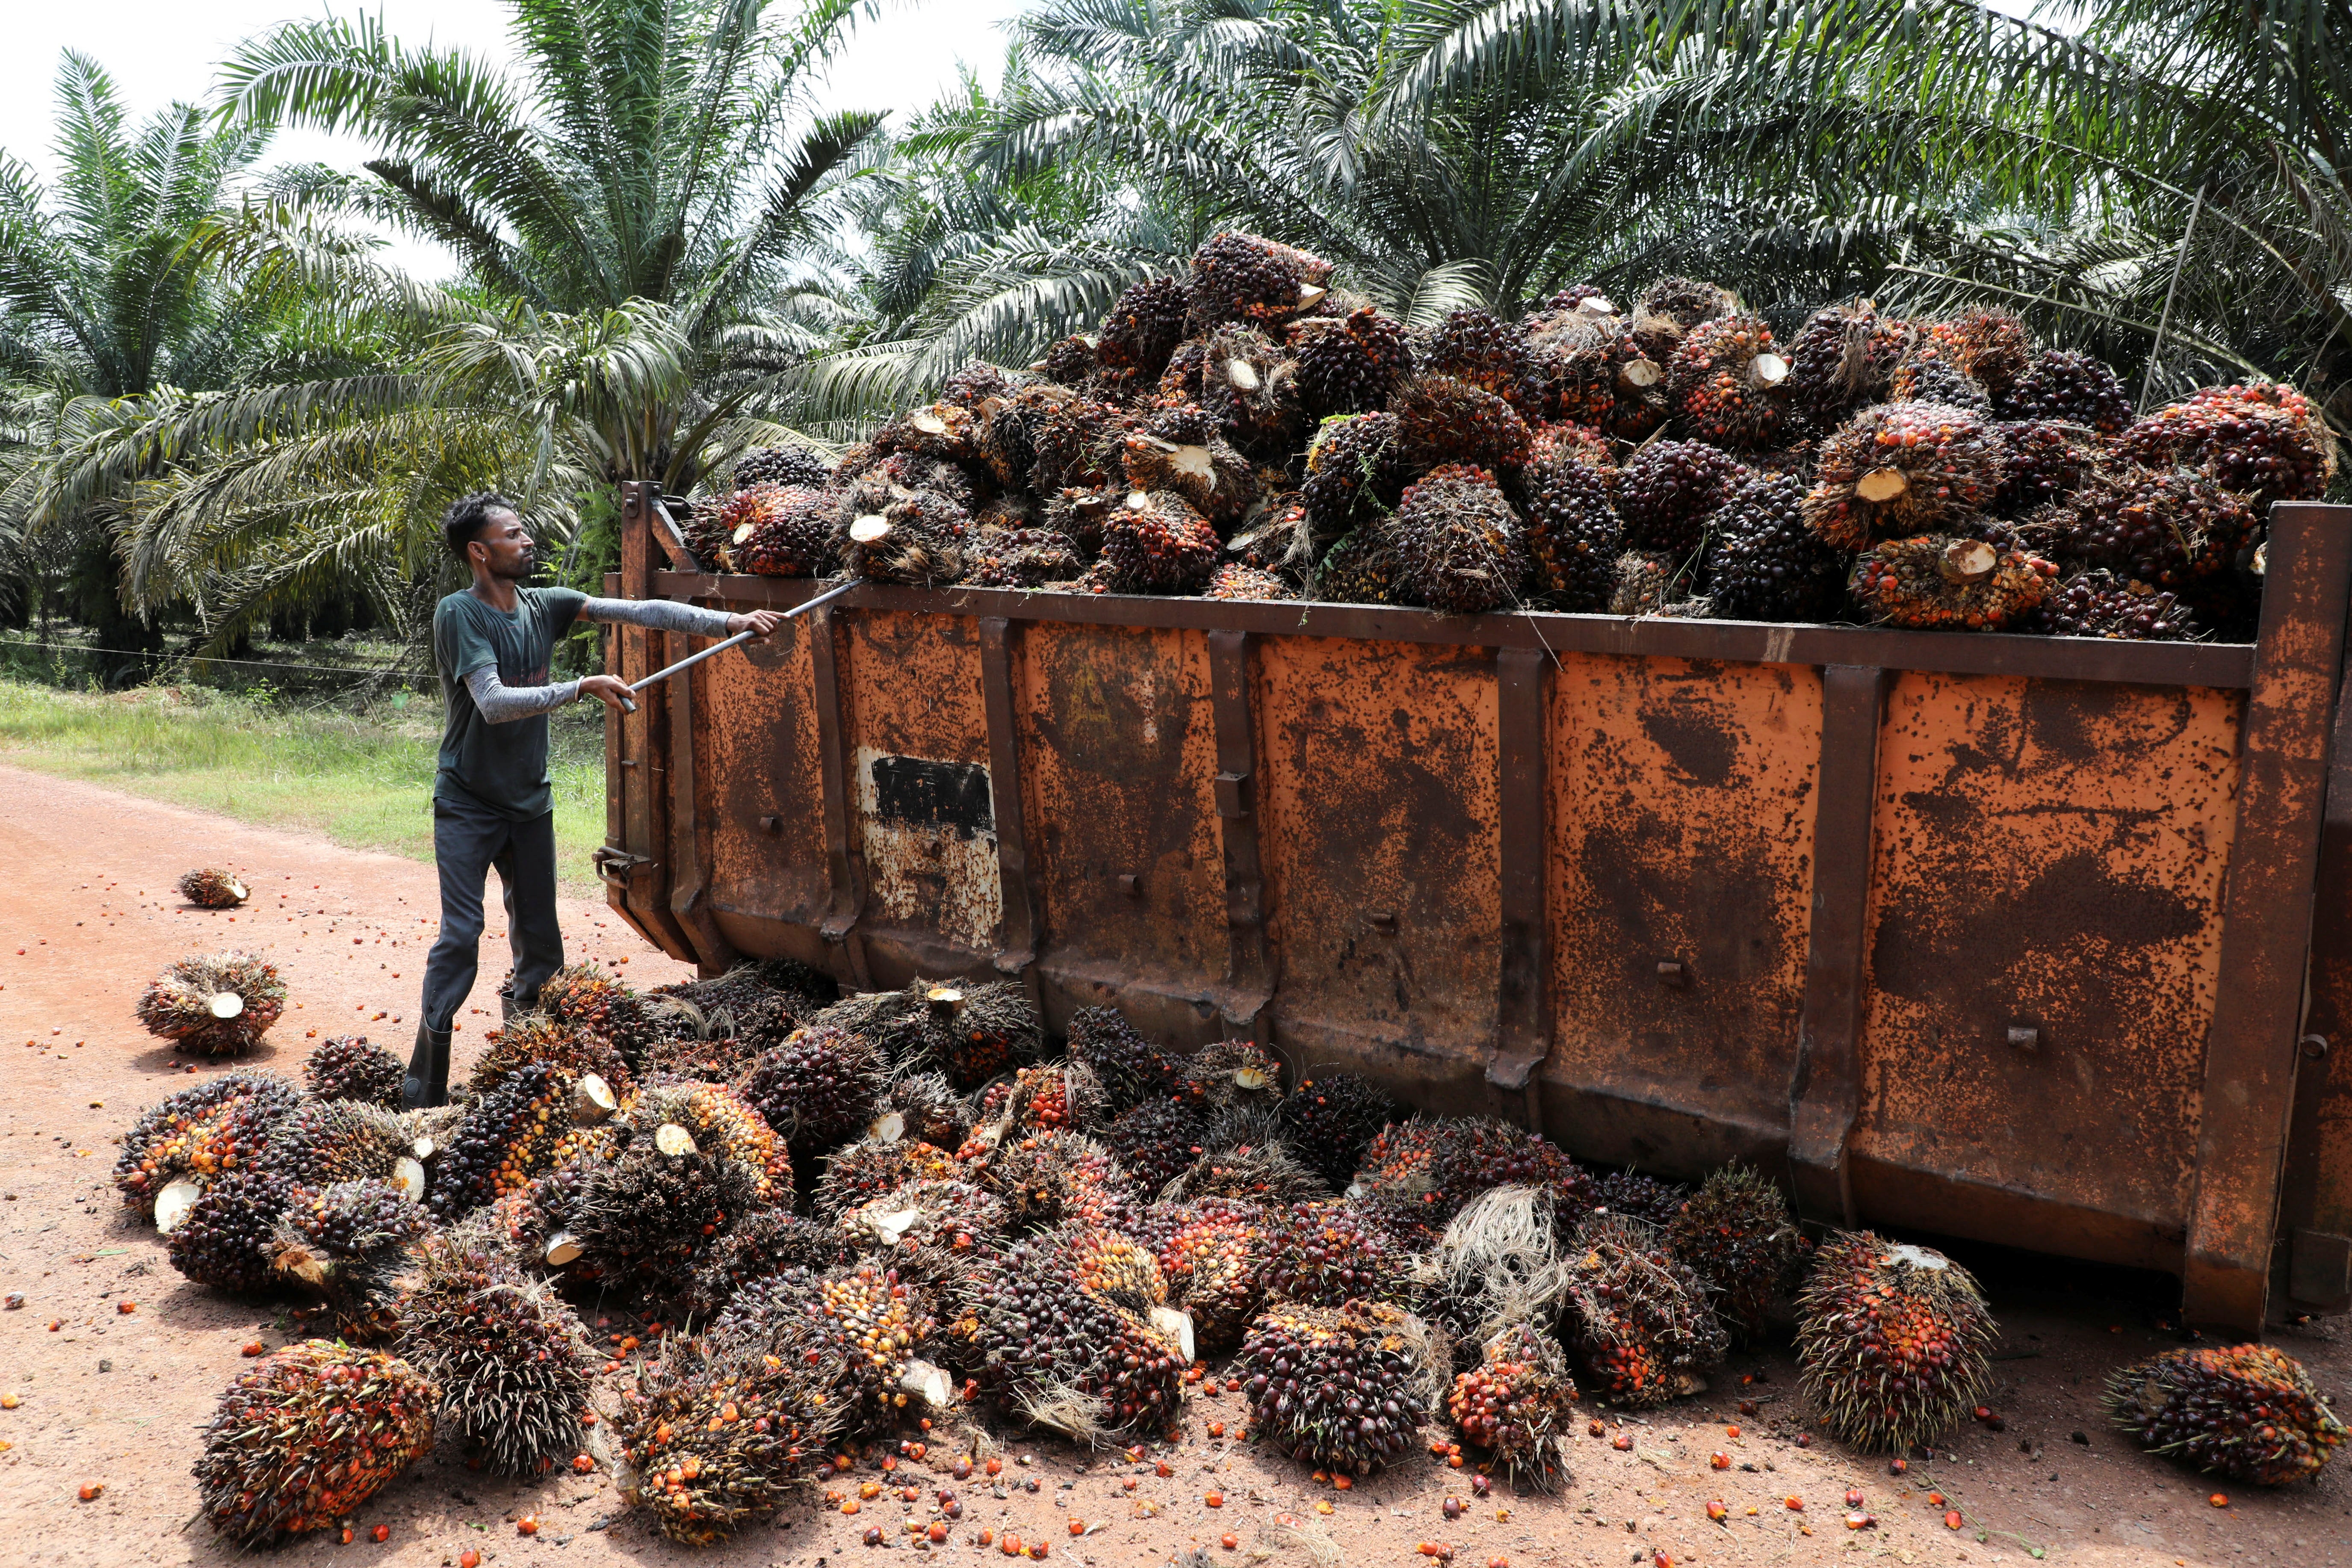 A worker handles palm oil fruits at a plantation in Slim River, Malaysia. Palm oil has a wide range of uses, but is a key driver of forest loss and habitat destruction